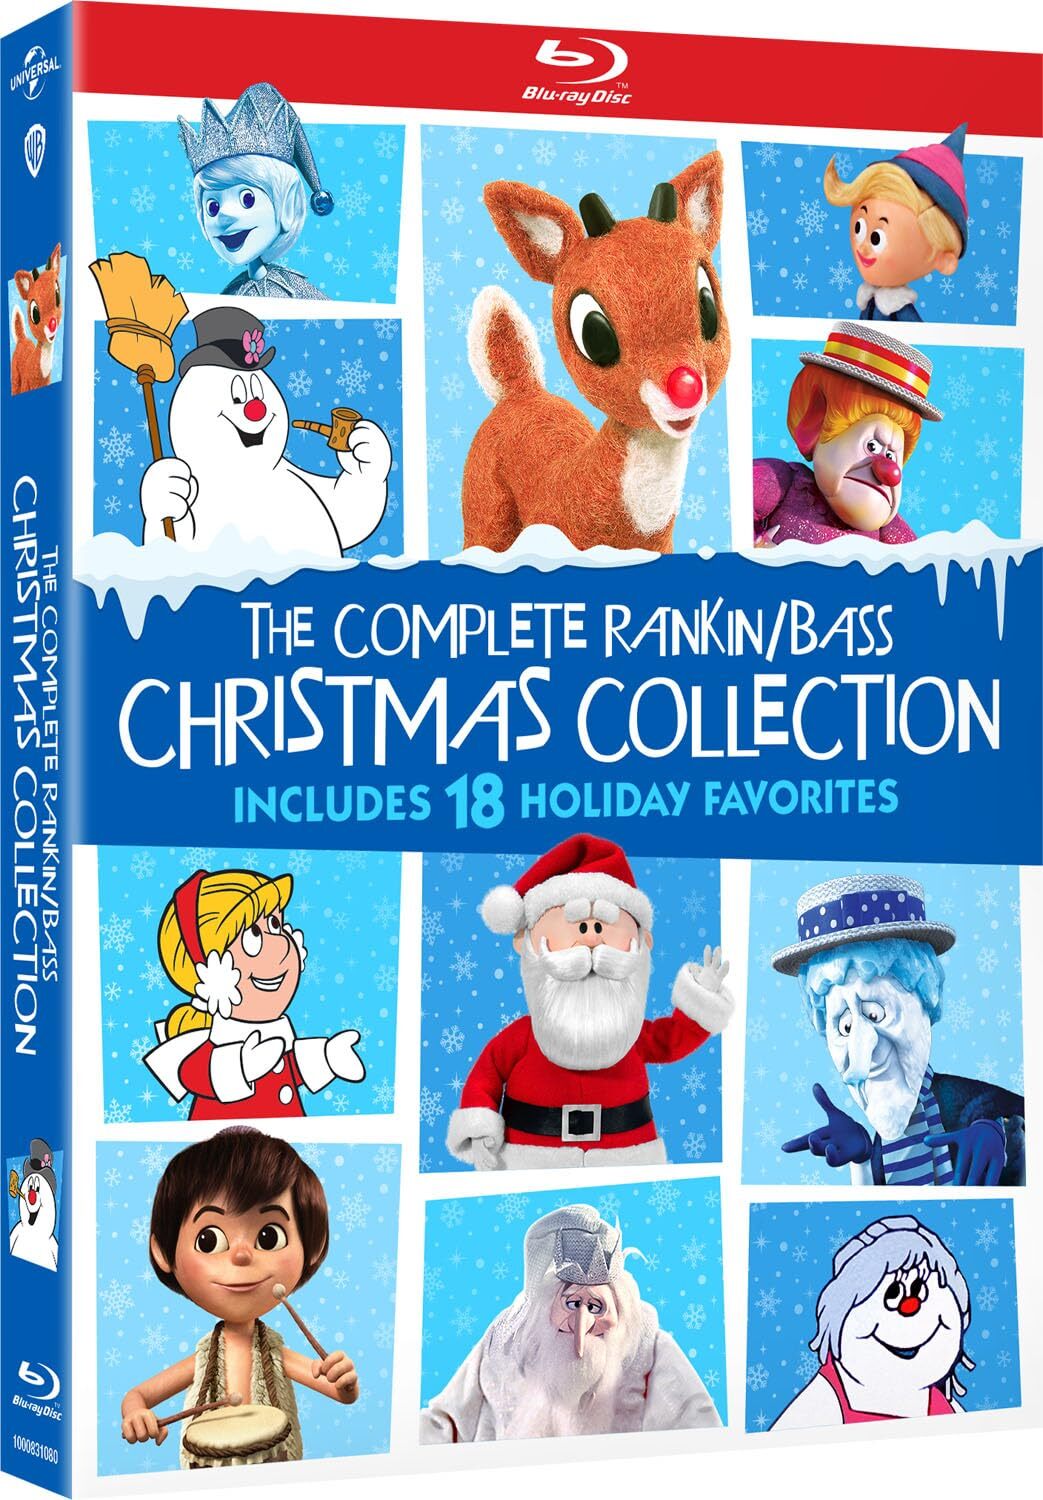 The Complete Rankin/Bass Christmas Collection